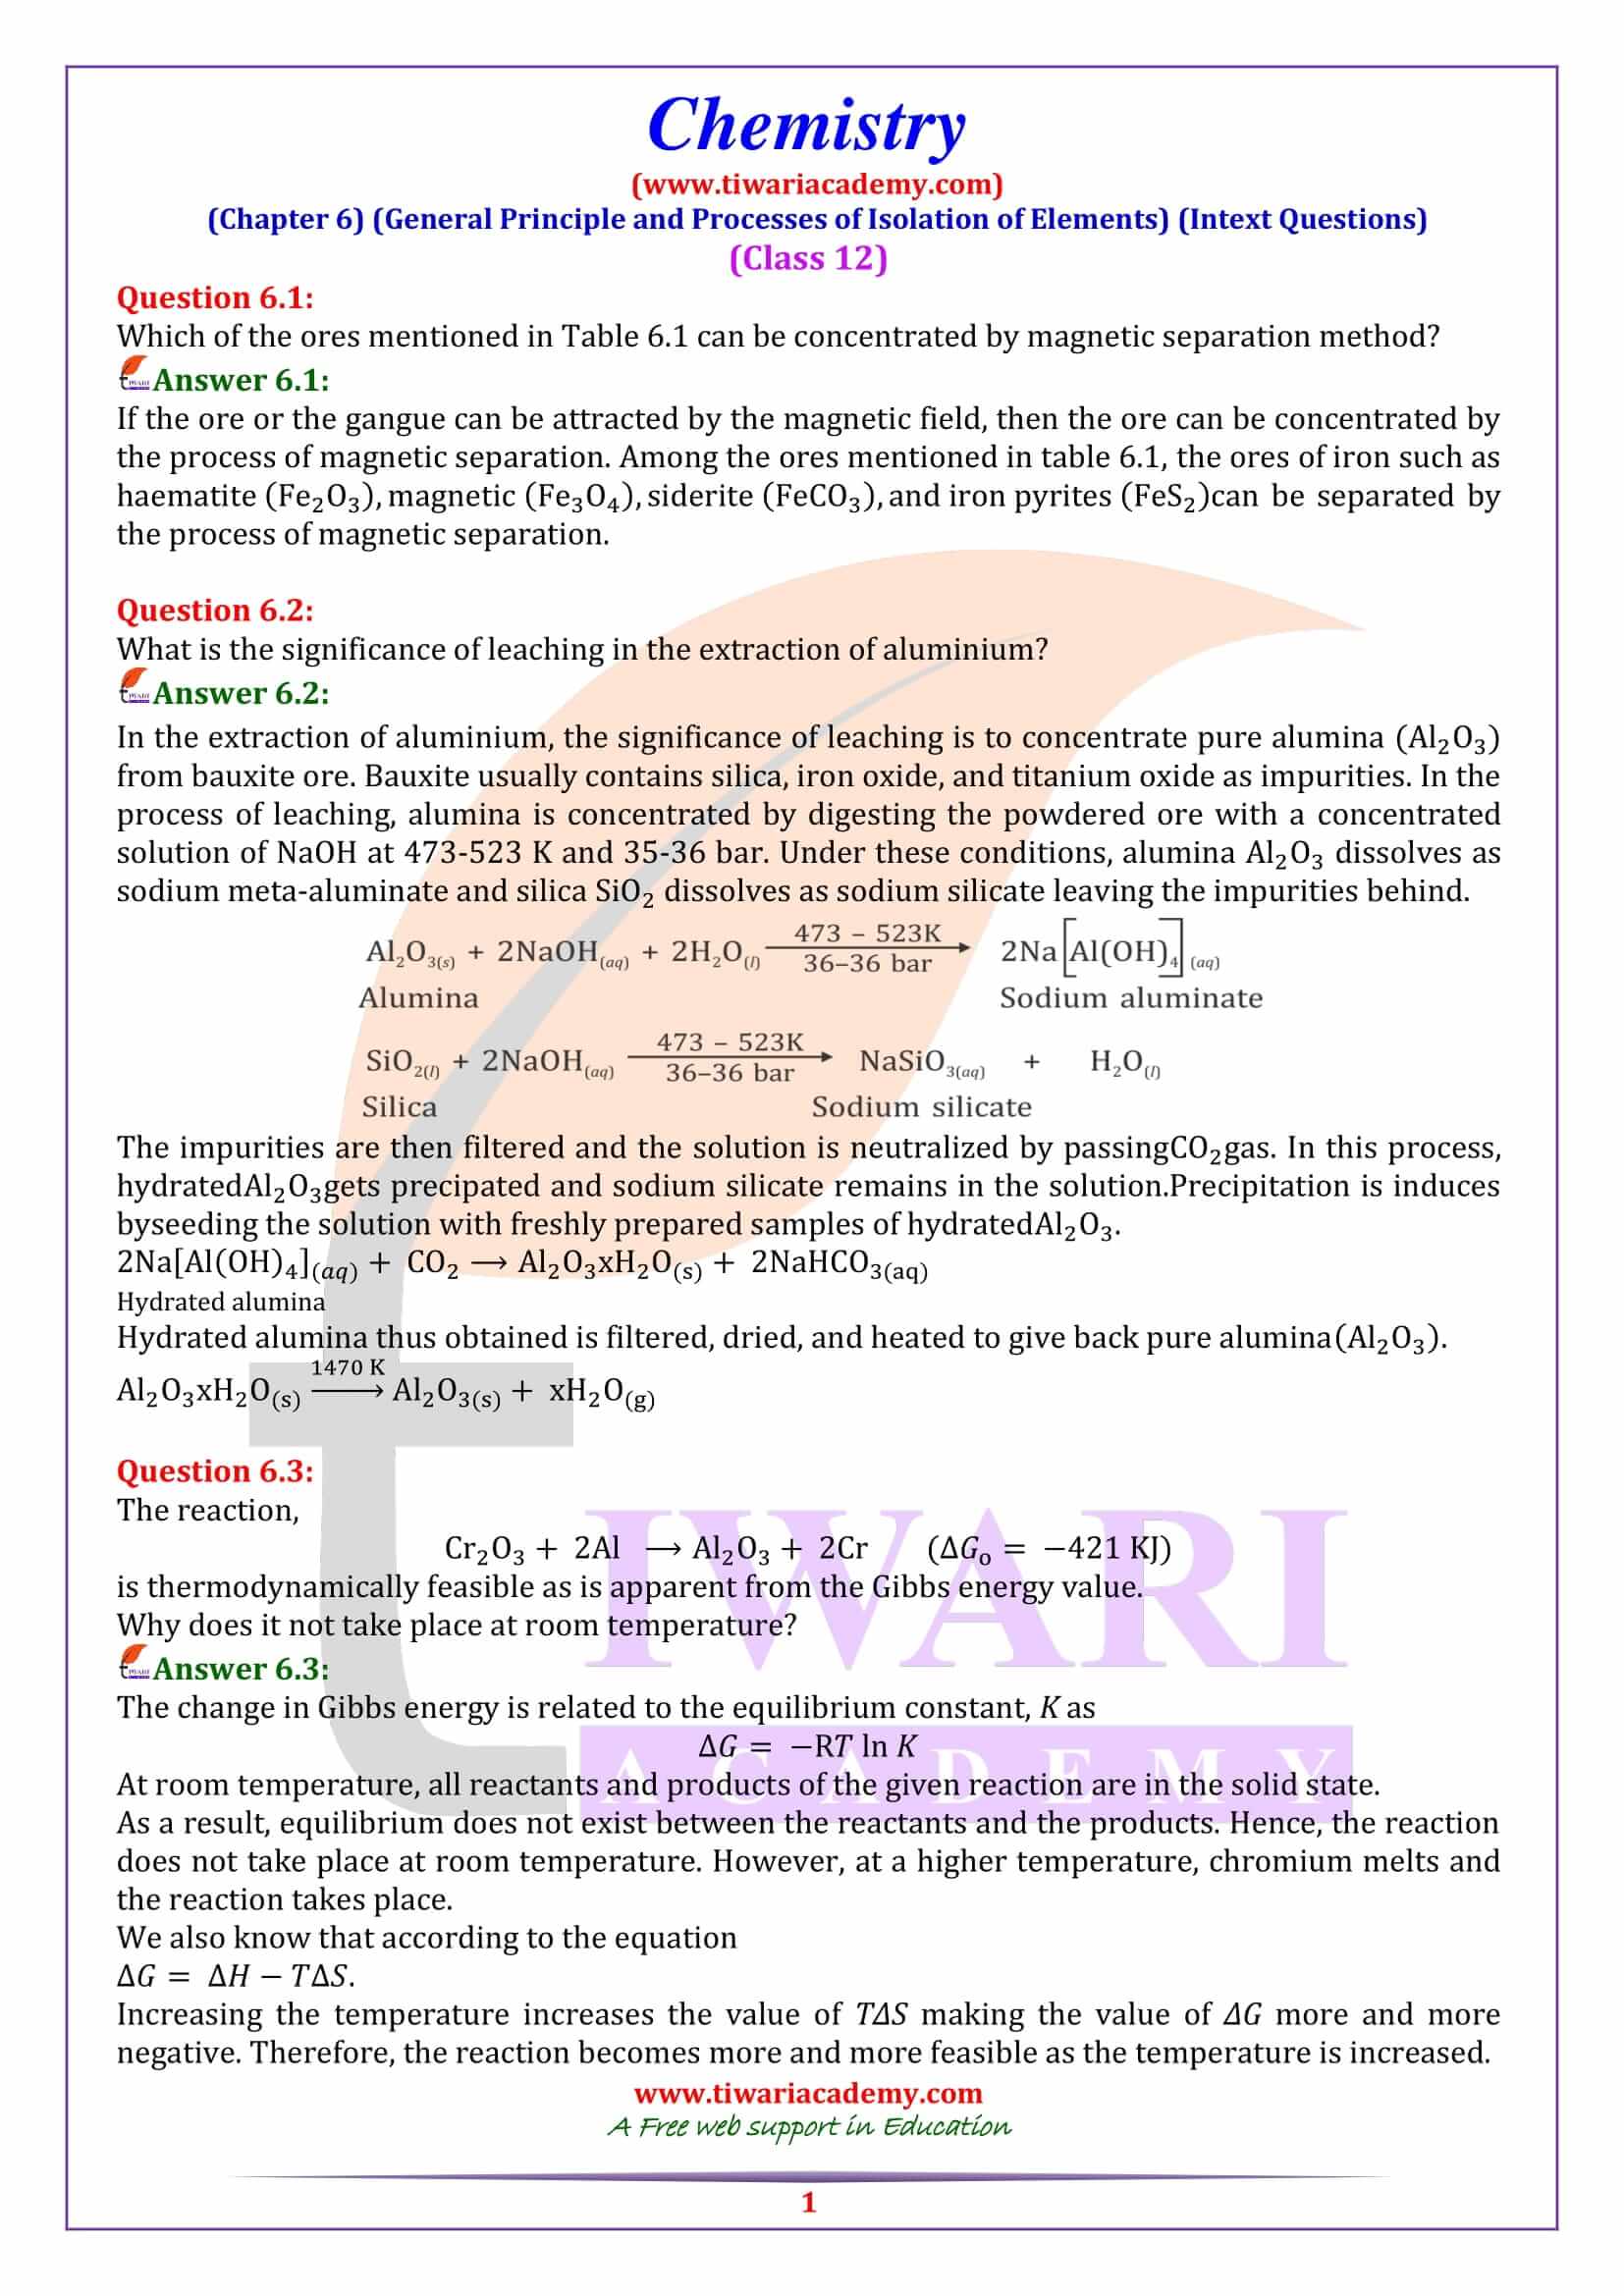 NCERT Solutions for Class 12 Chemistry Chapter 6 Intext